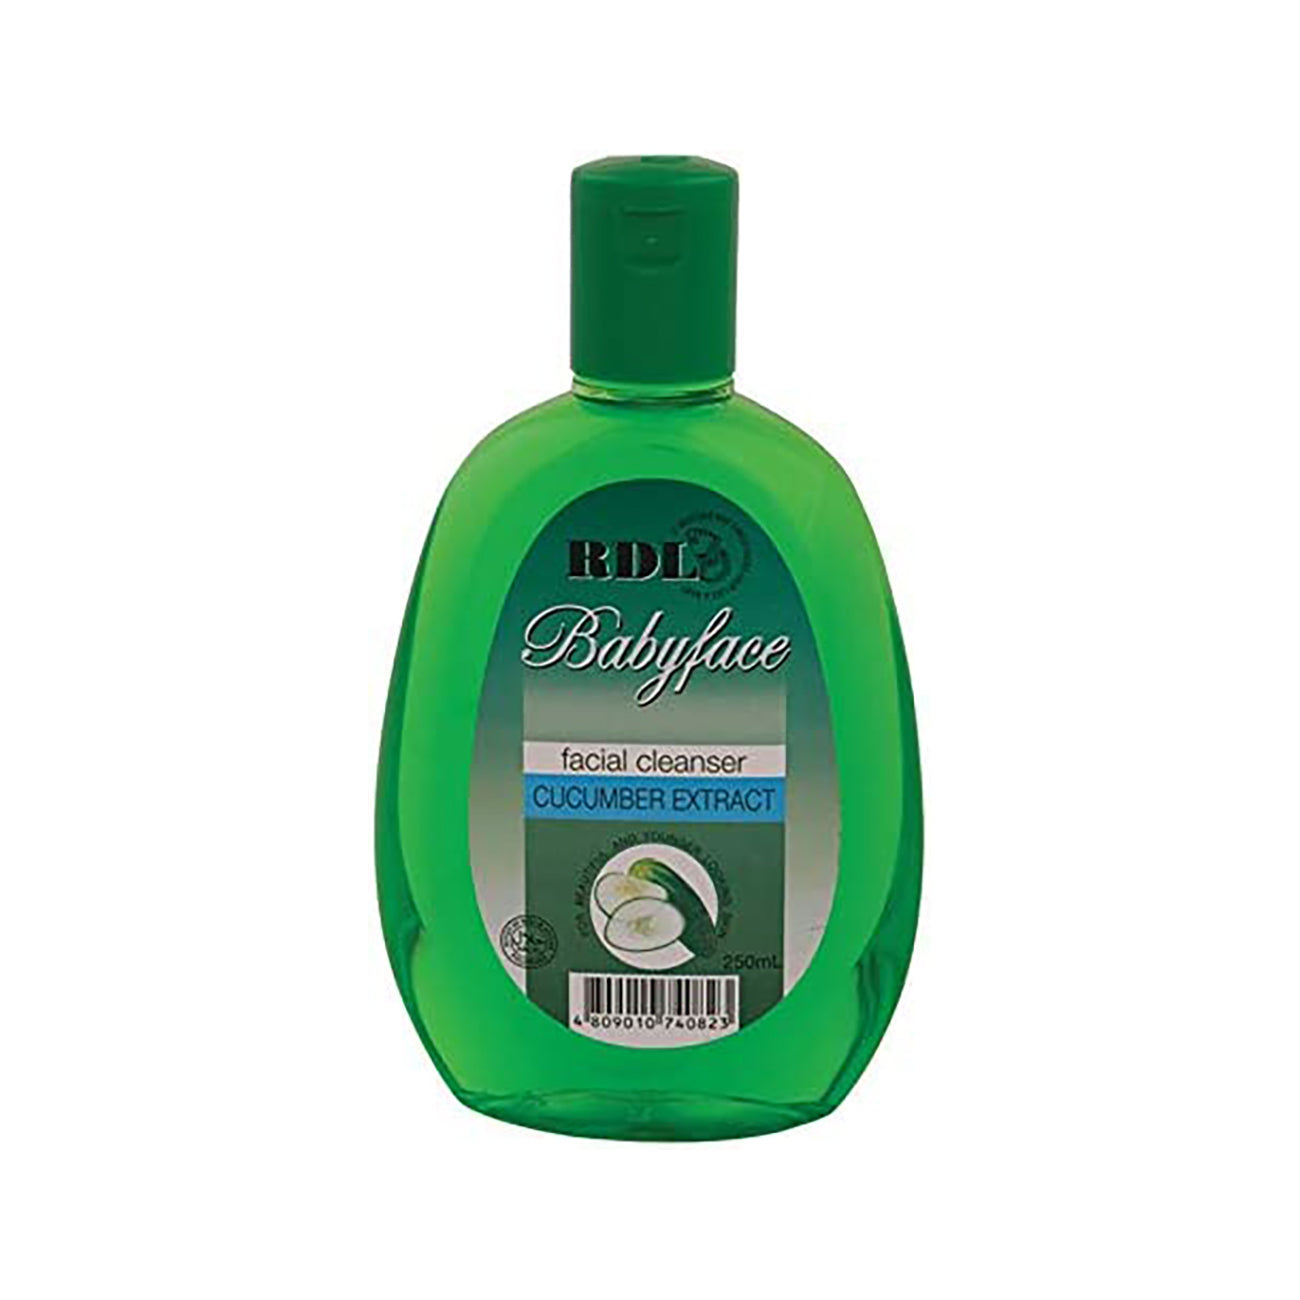 Rdl Facial Cleanser Cucumber Extract, 250 Ml